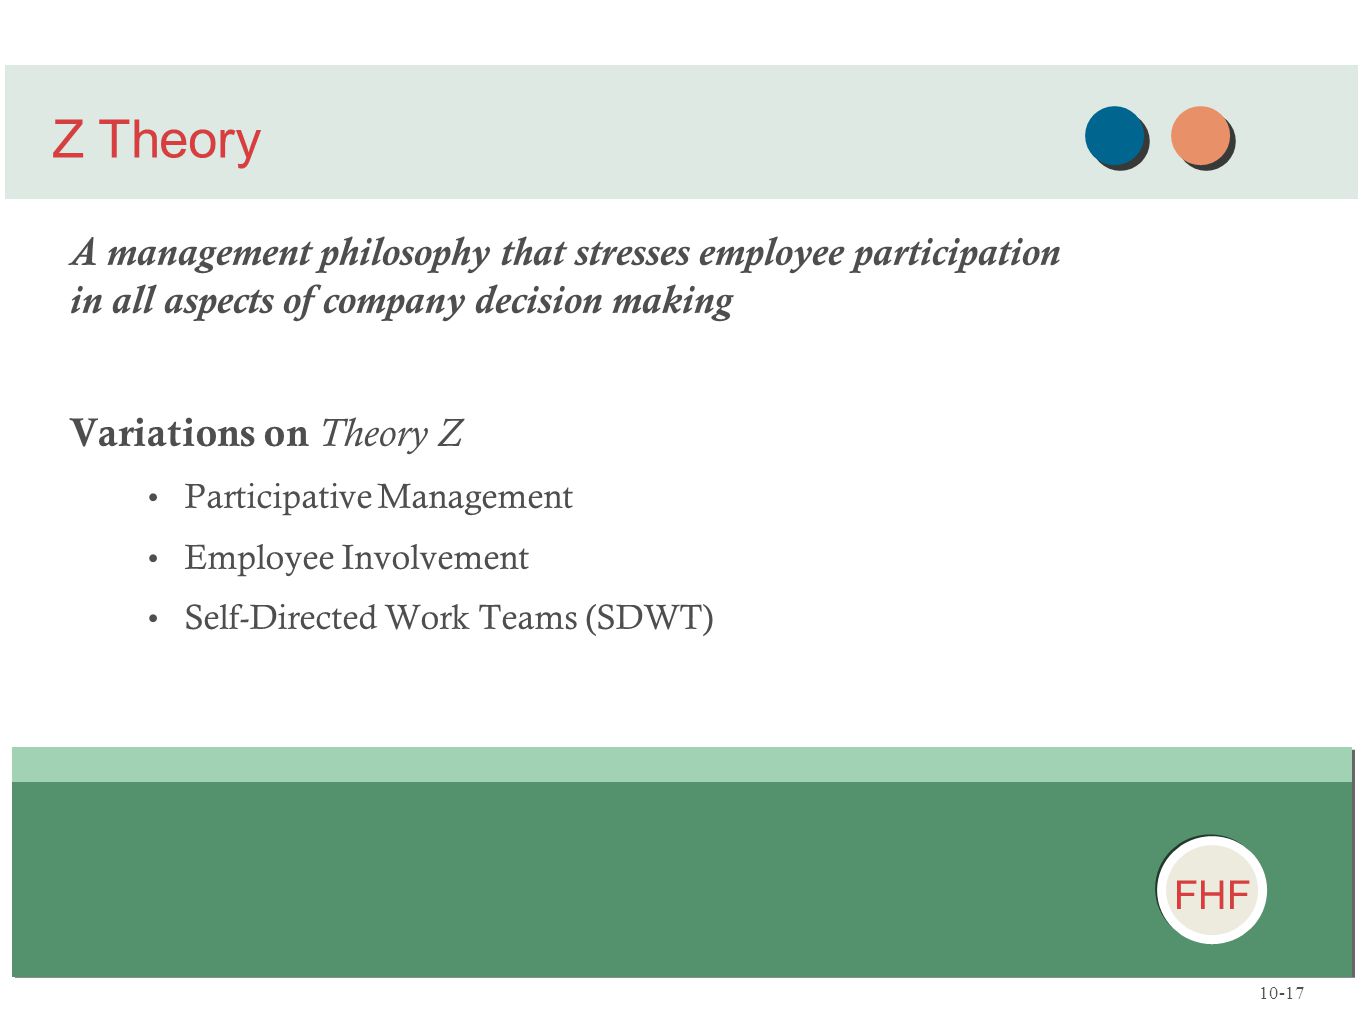 Z Theory A management philosophy that stresses employee participation in all aspects of company decision making.